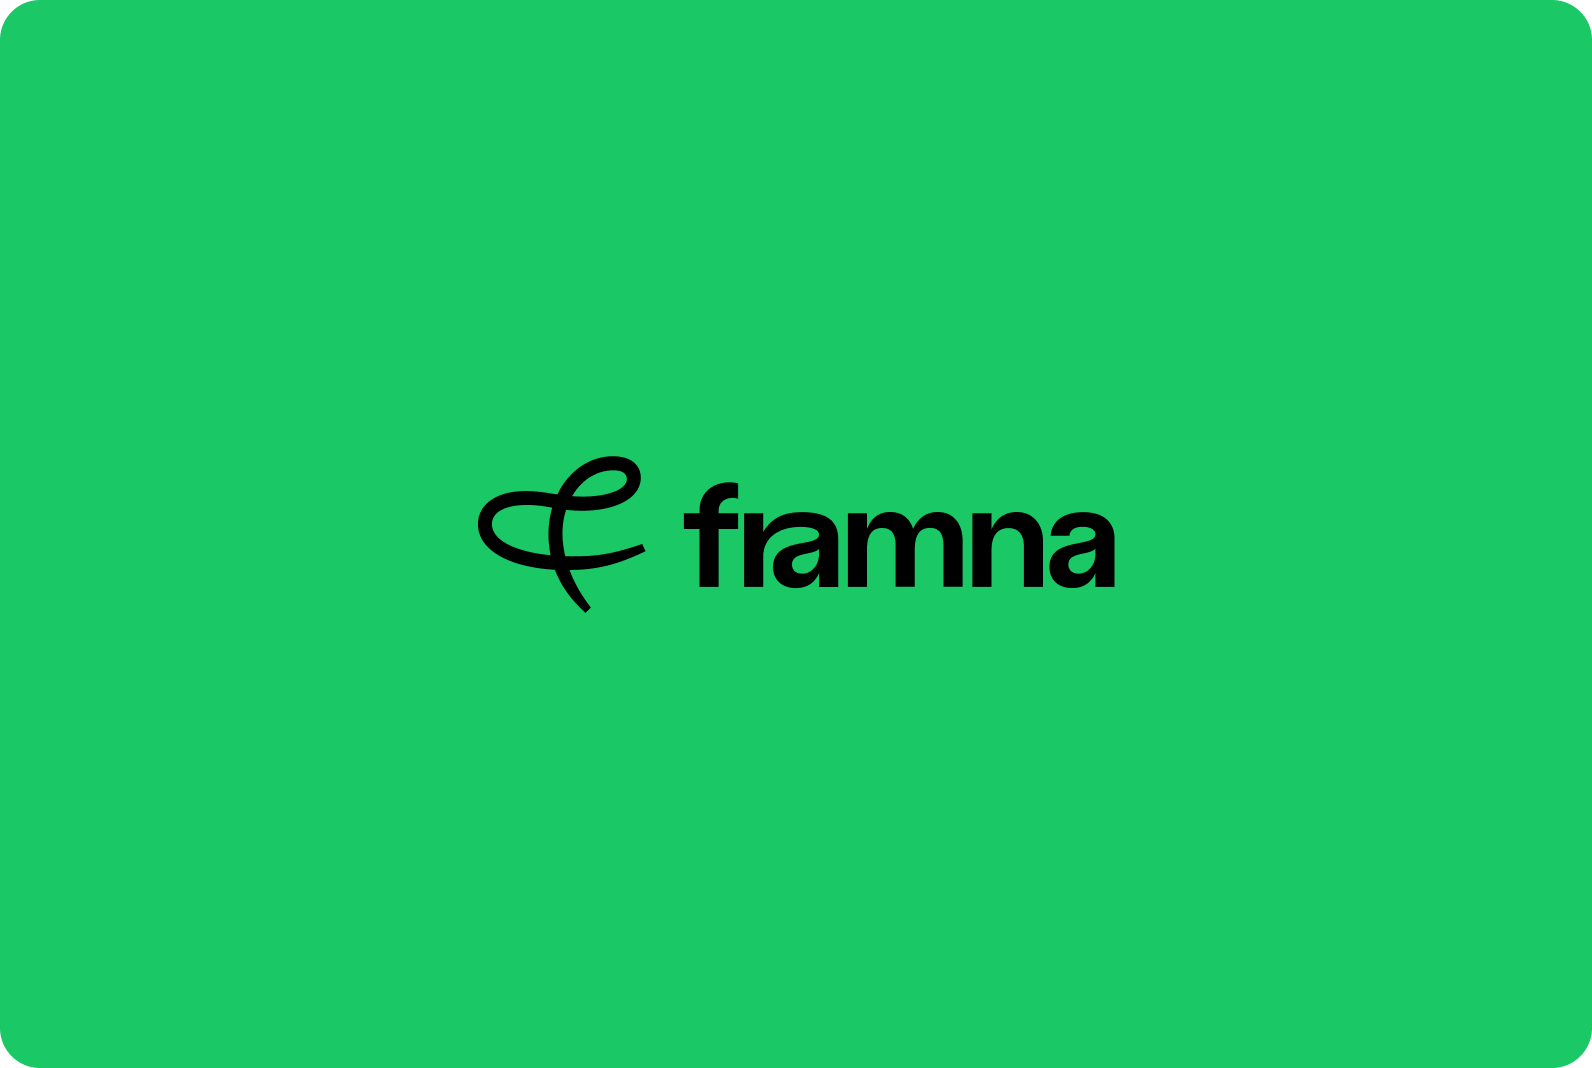 Framna: “Our ambition is to become the world's leading digital product agency”